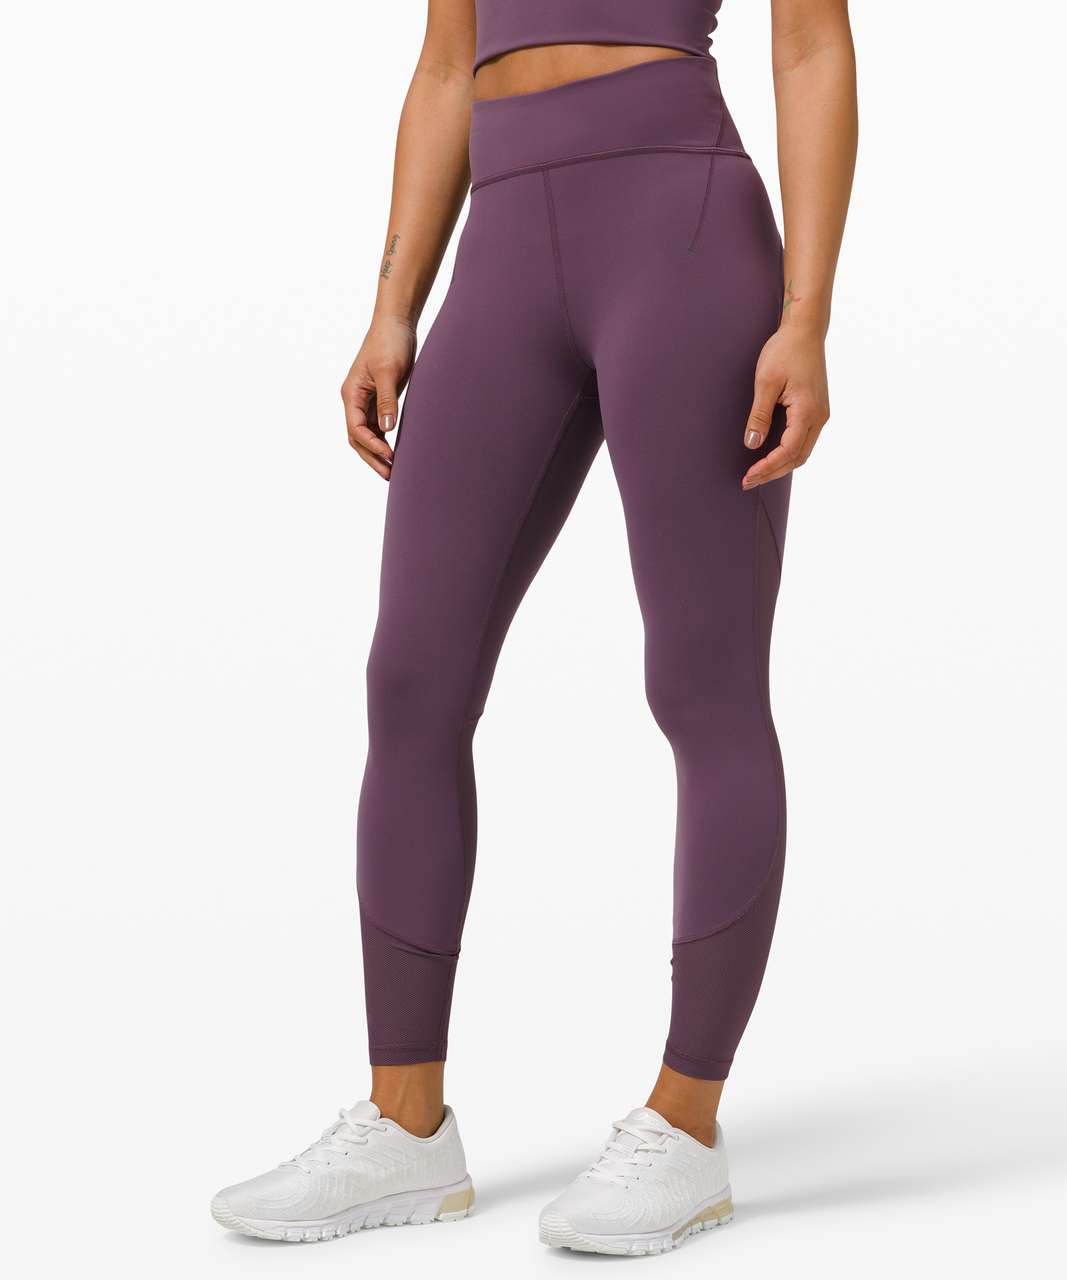 Lululemon Everlux and Mesh High-Rise Tight 25" - Grape Thistle